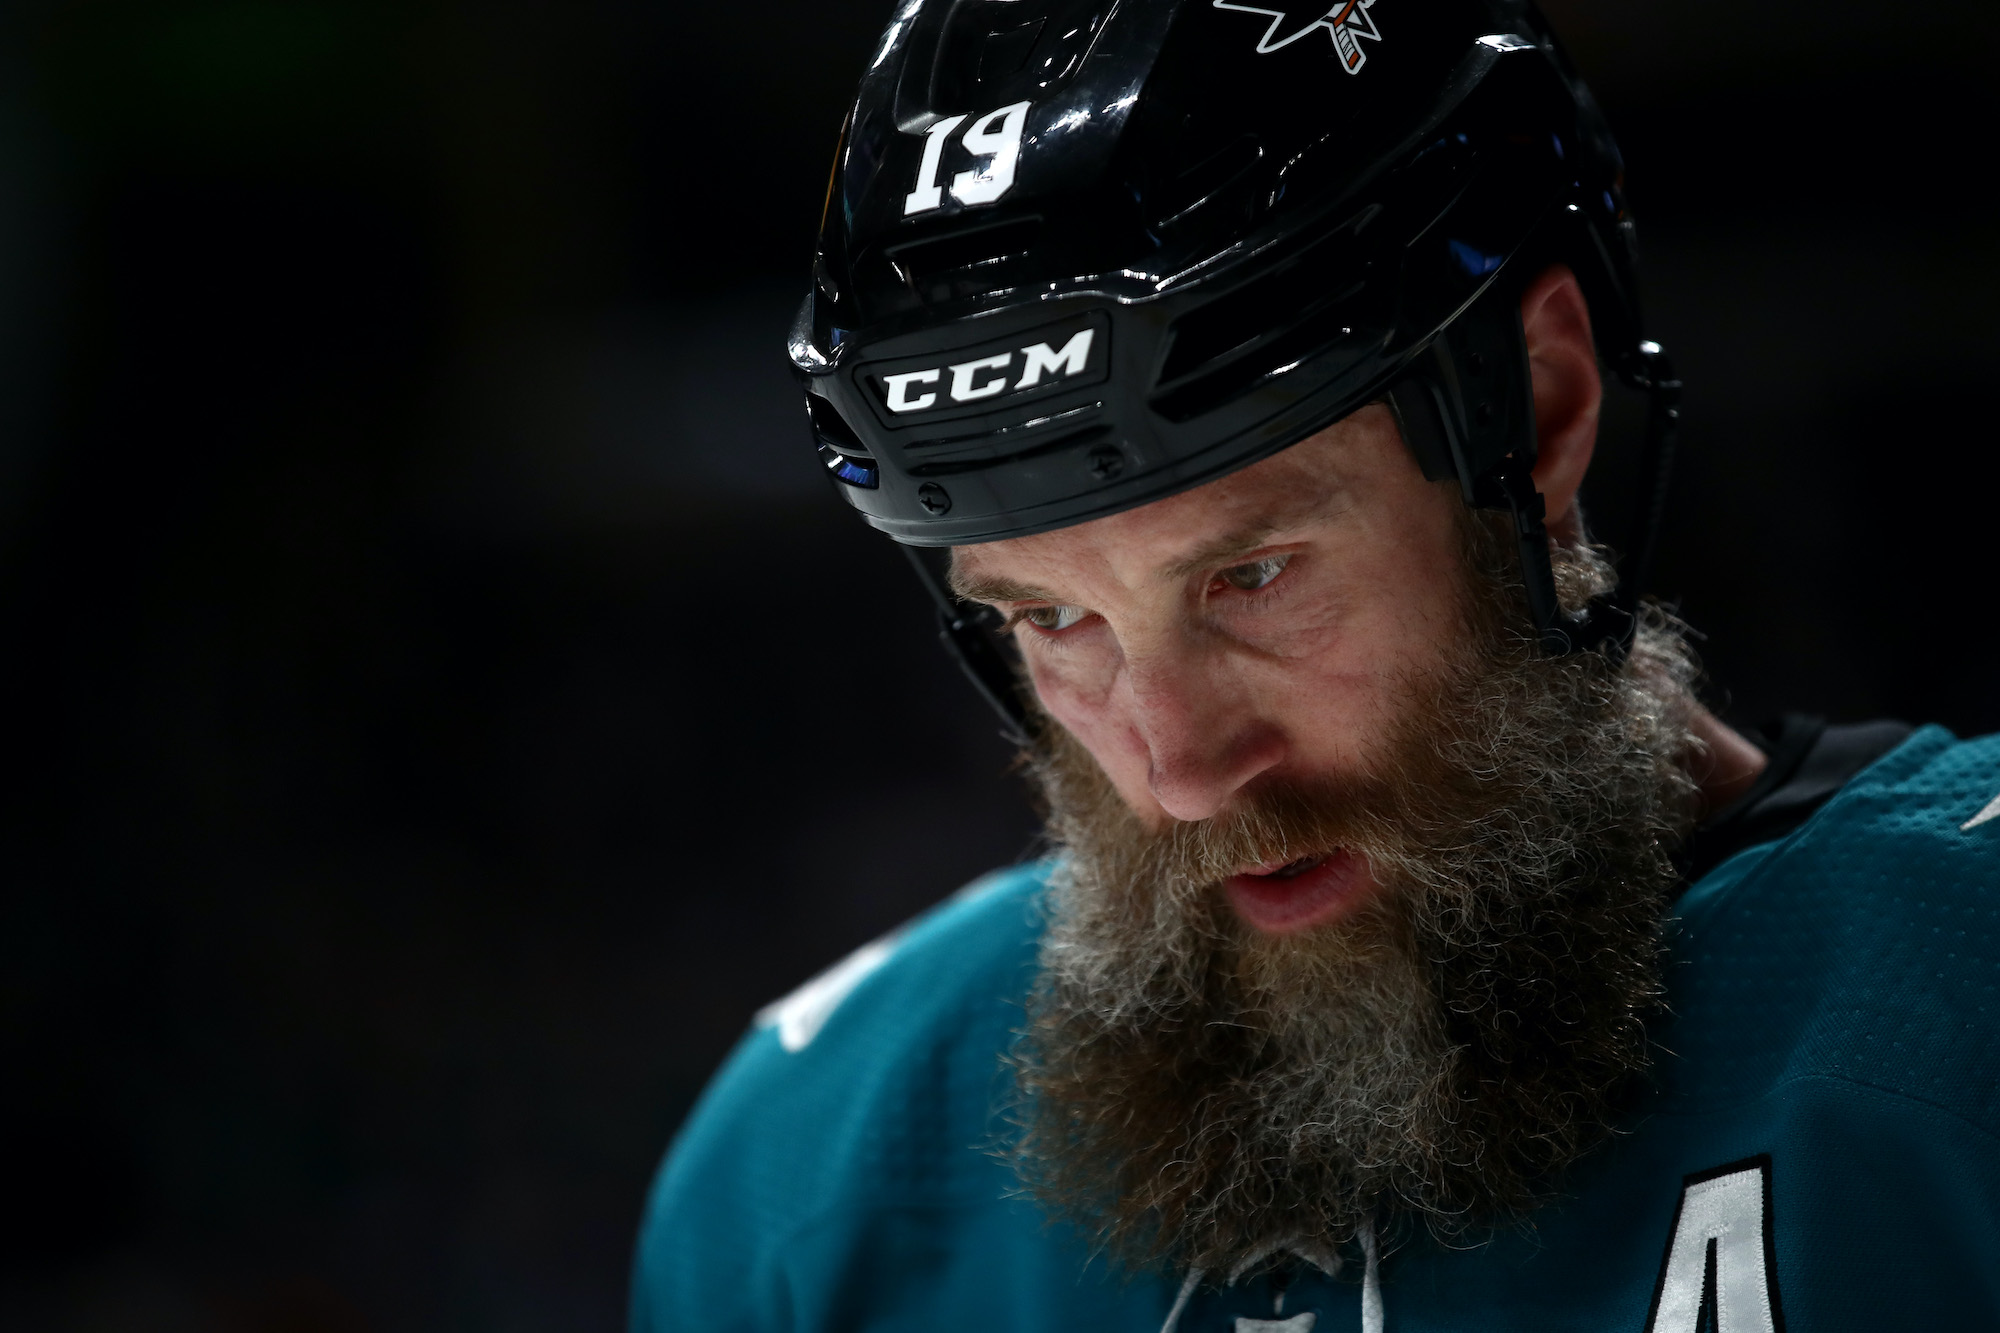 SAN JOSE, CALIFORNIA - MARCH 03: Joe Thornton #19 of the San Jose Sharks skates on the ice during their game against the Toronto Maple Leafs at SAP Center on March 03, 2020 in San Jose, California. (Photo by Ezra Shaw/Getty Images)